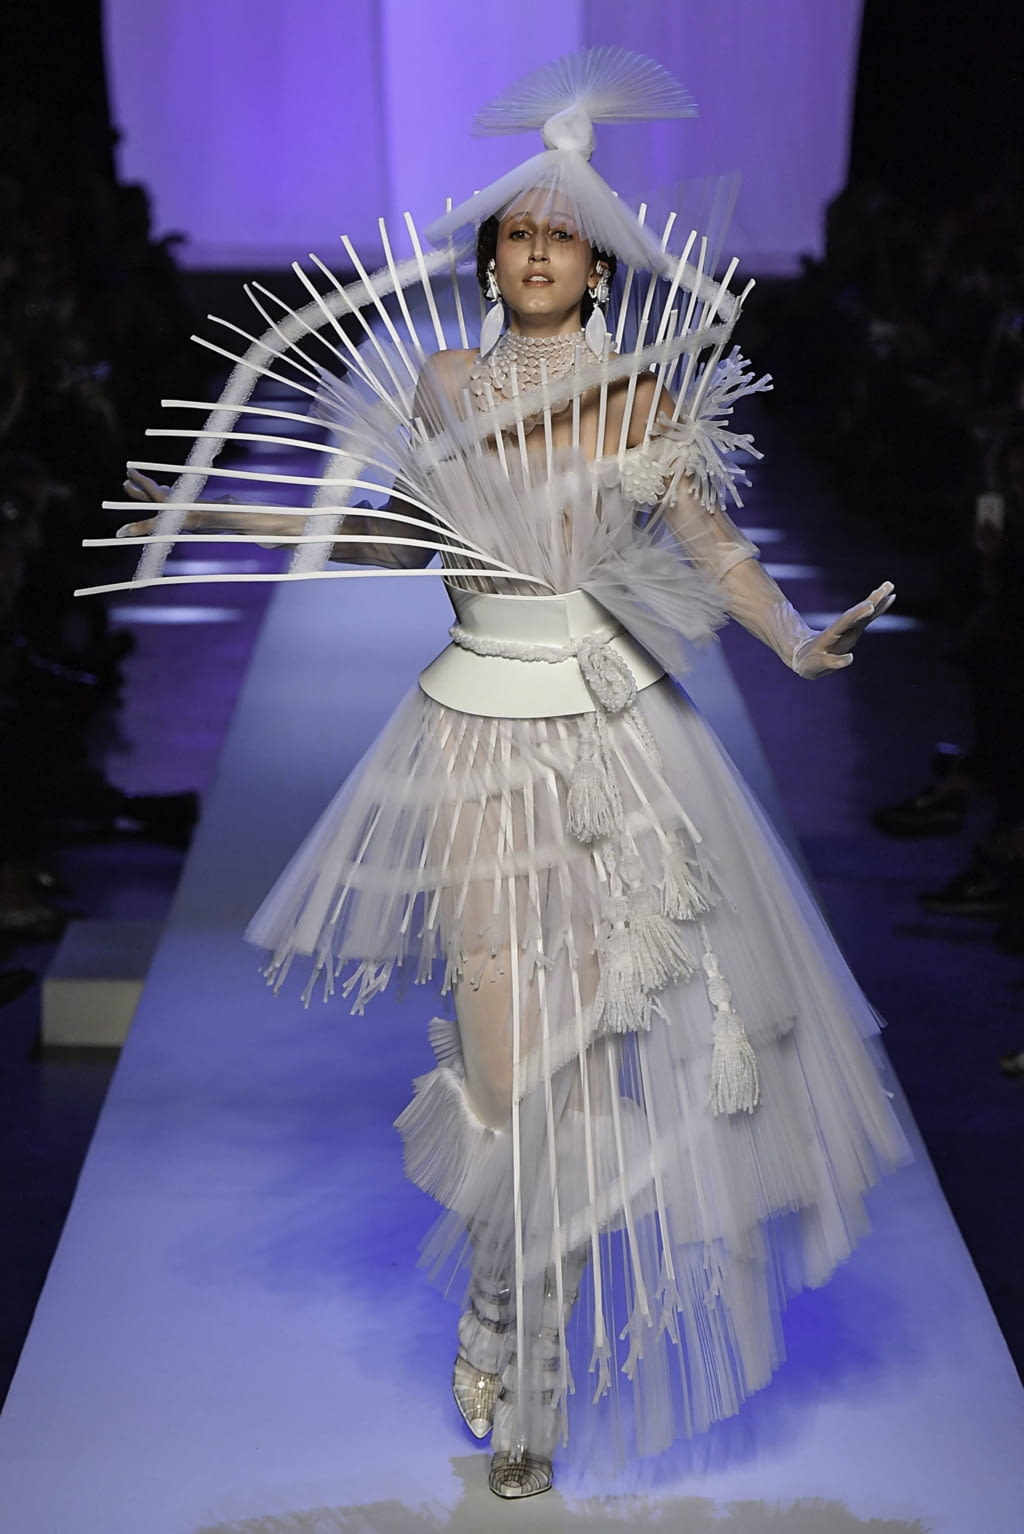 Jean Paul Gaultier, Haute Couture Spring Summer 2019 Full Show